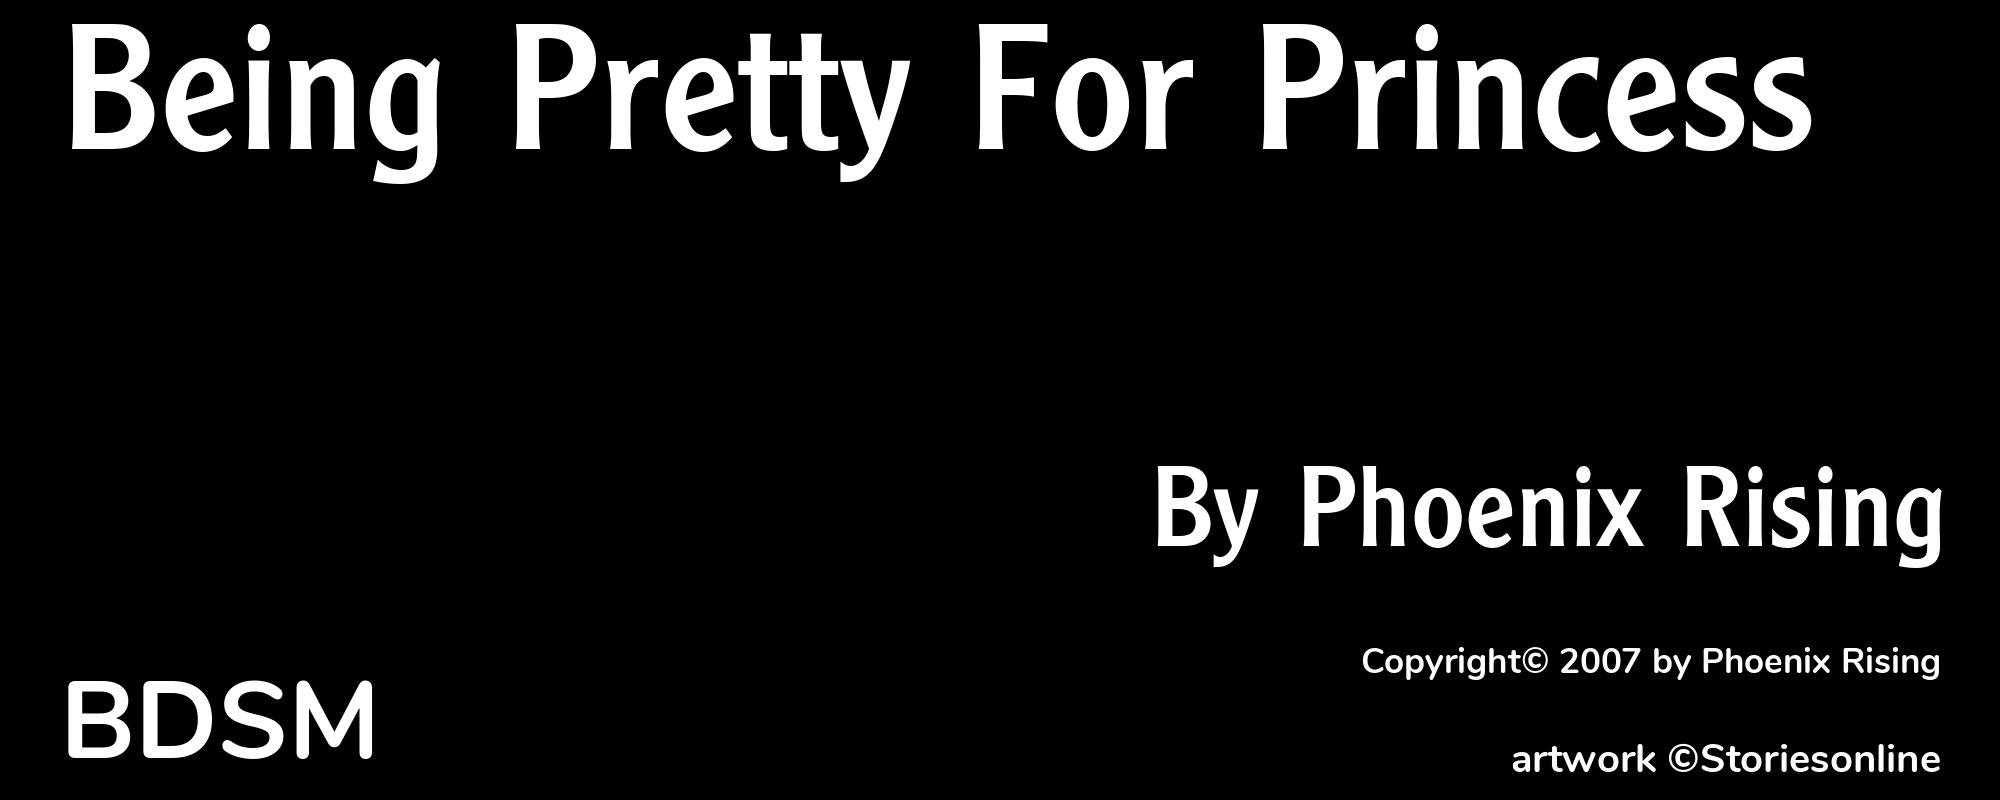 Being Pretty For Princess - Cover